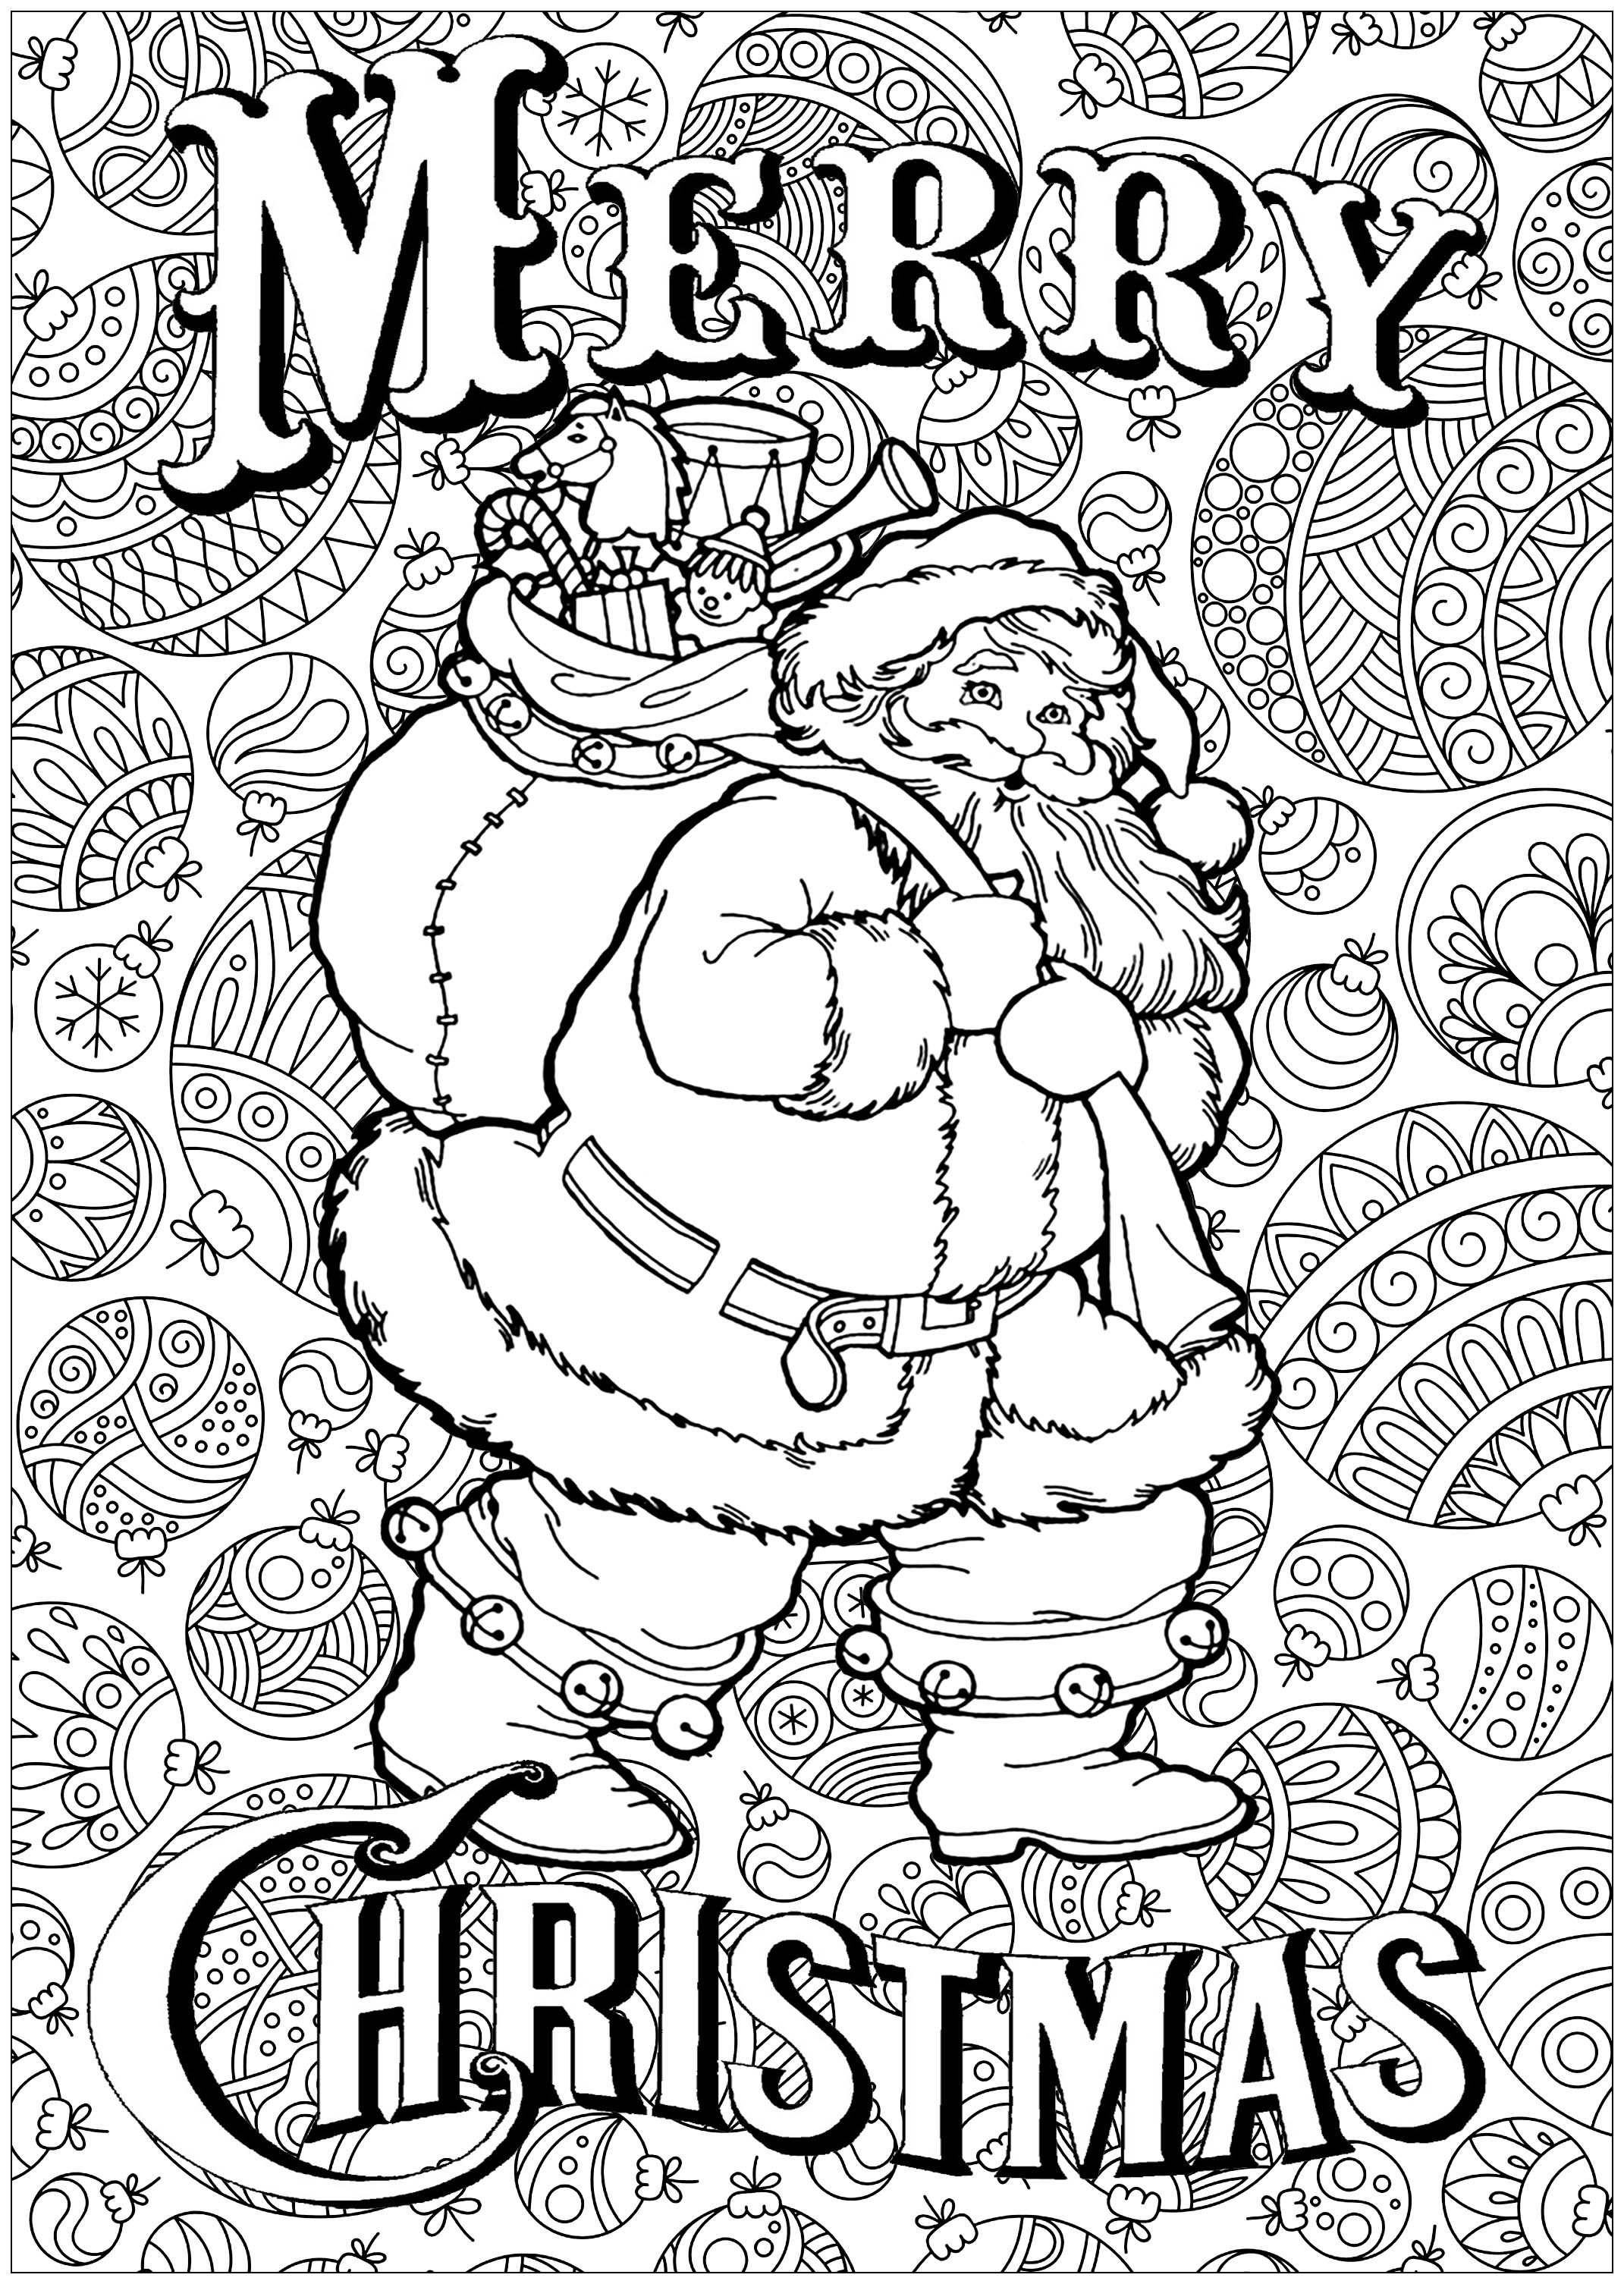 Relaxing Holiday Coloring Pages Christmas Adult Coloring Pages